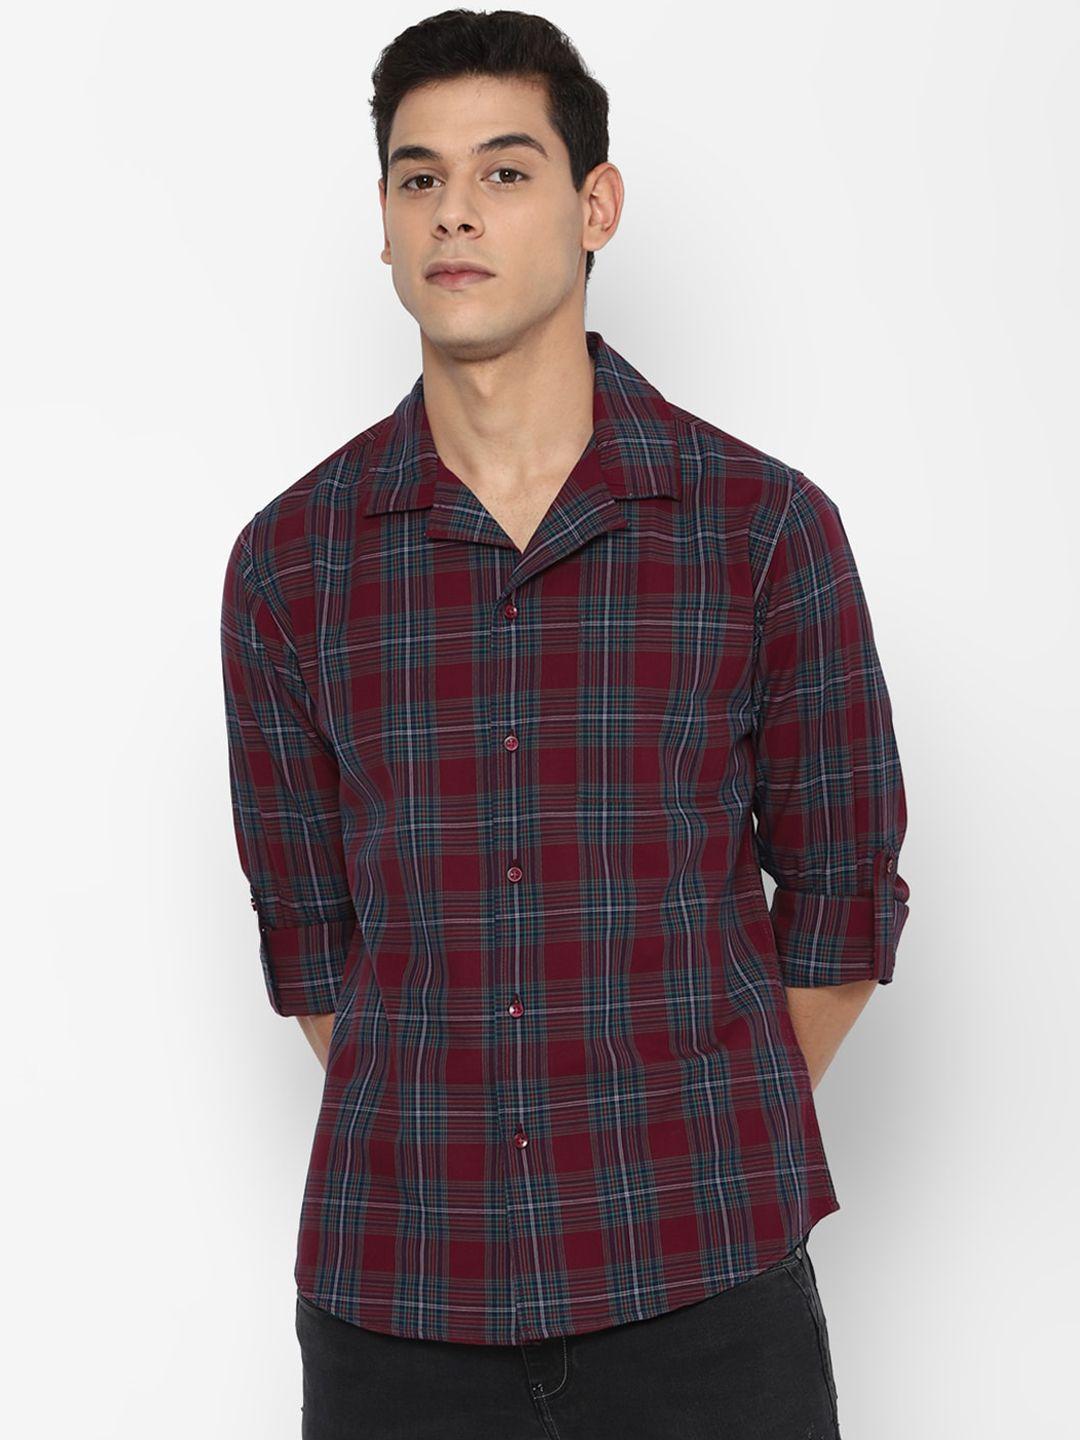 forever 21 men blue & maroon classic opaque tartan checked cotton casual shirt